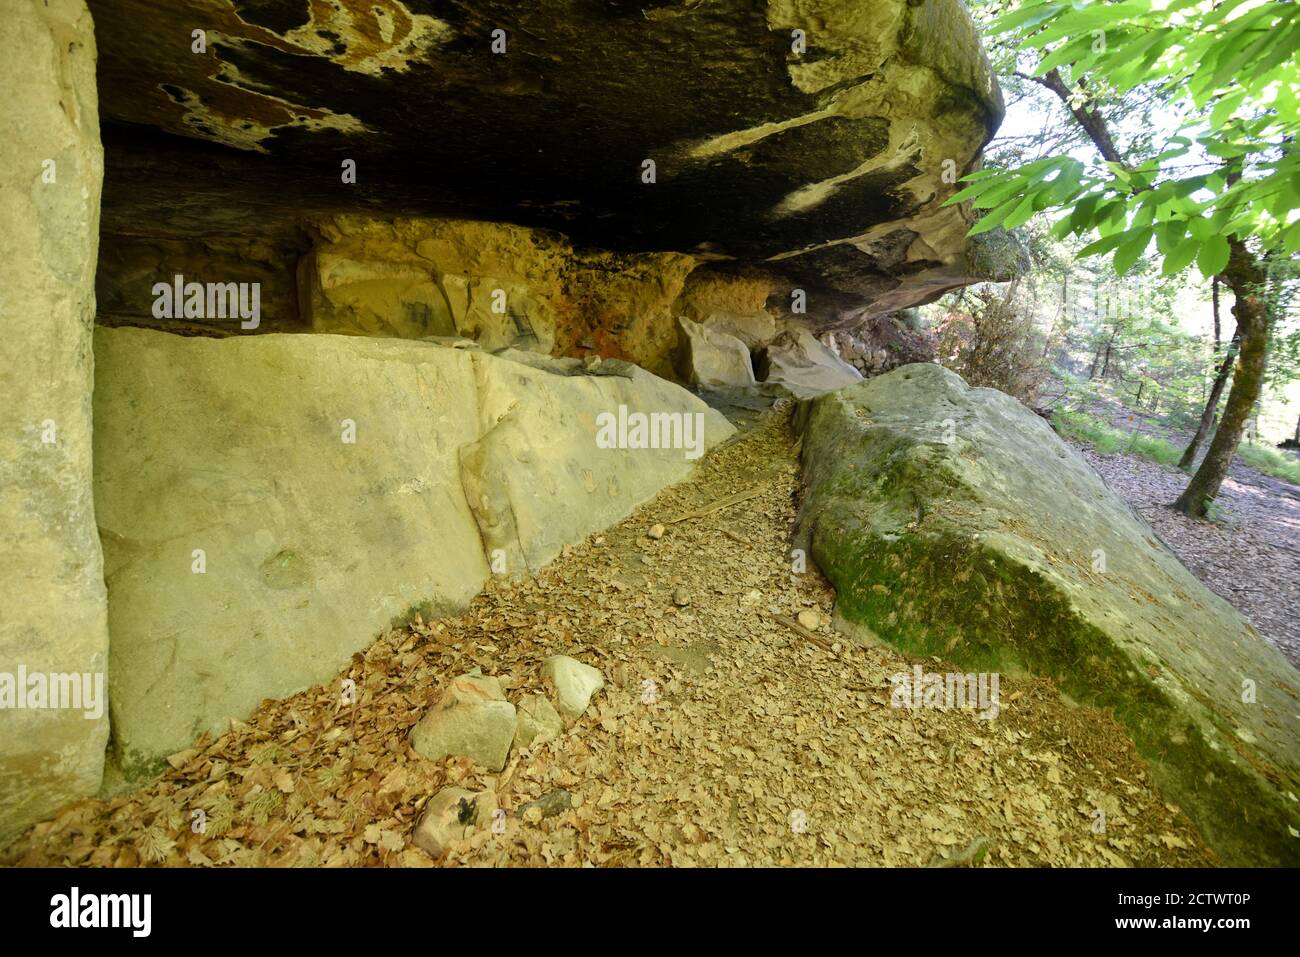 Rock Shelter, Stone Shelter, Cave Shelter or Cave Dwelling Among Sandstone Rocks or Boulders at Annot Alpes-de-Haute-Provence Provence France Stock Photo